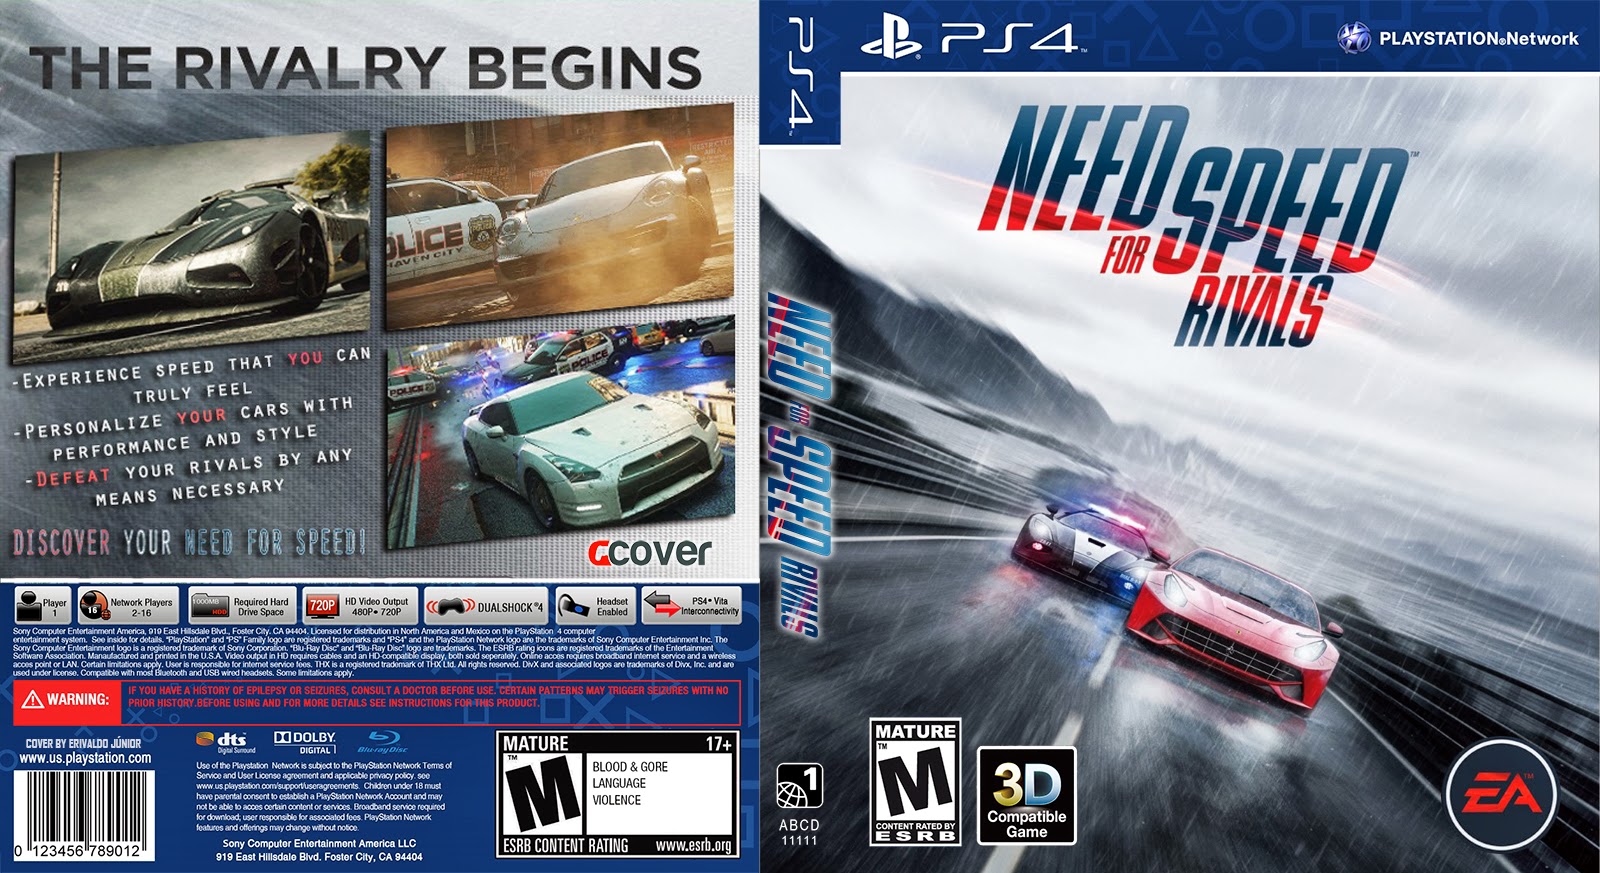 Rivals ps4. Need for Speed Rivals ps4 диск. NFS Rivals ps3 обложка. Игра NFS Rivals (ps4). Need for Speed Heat ps4 диск.